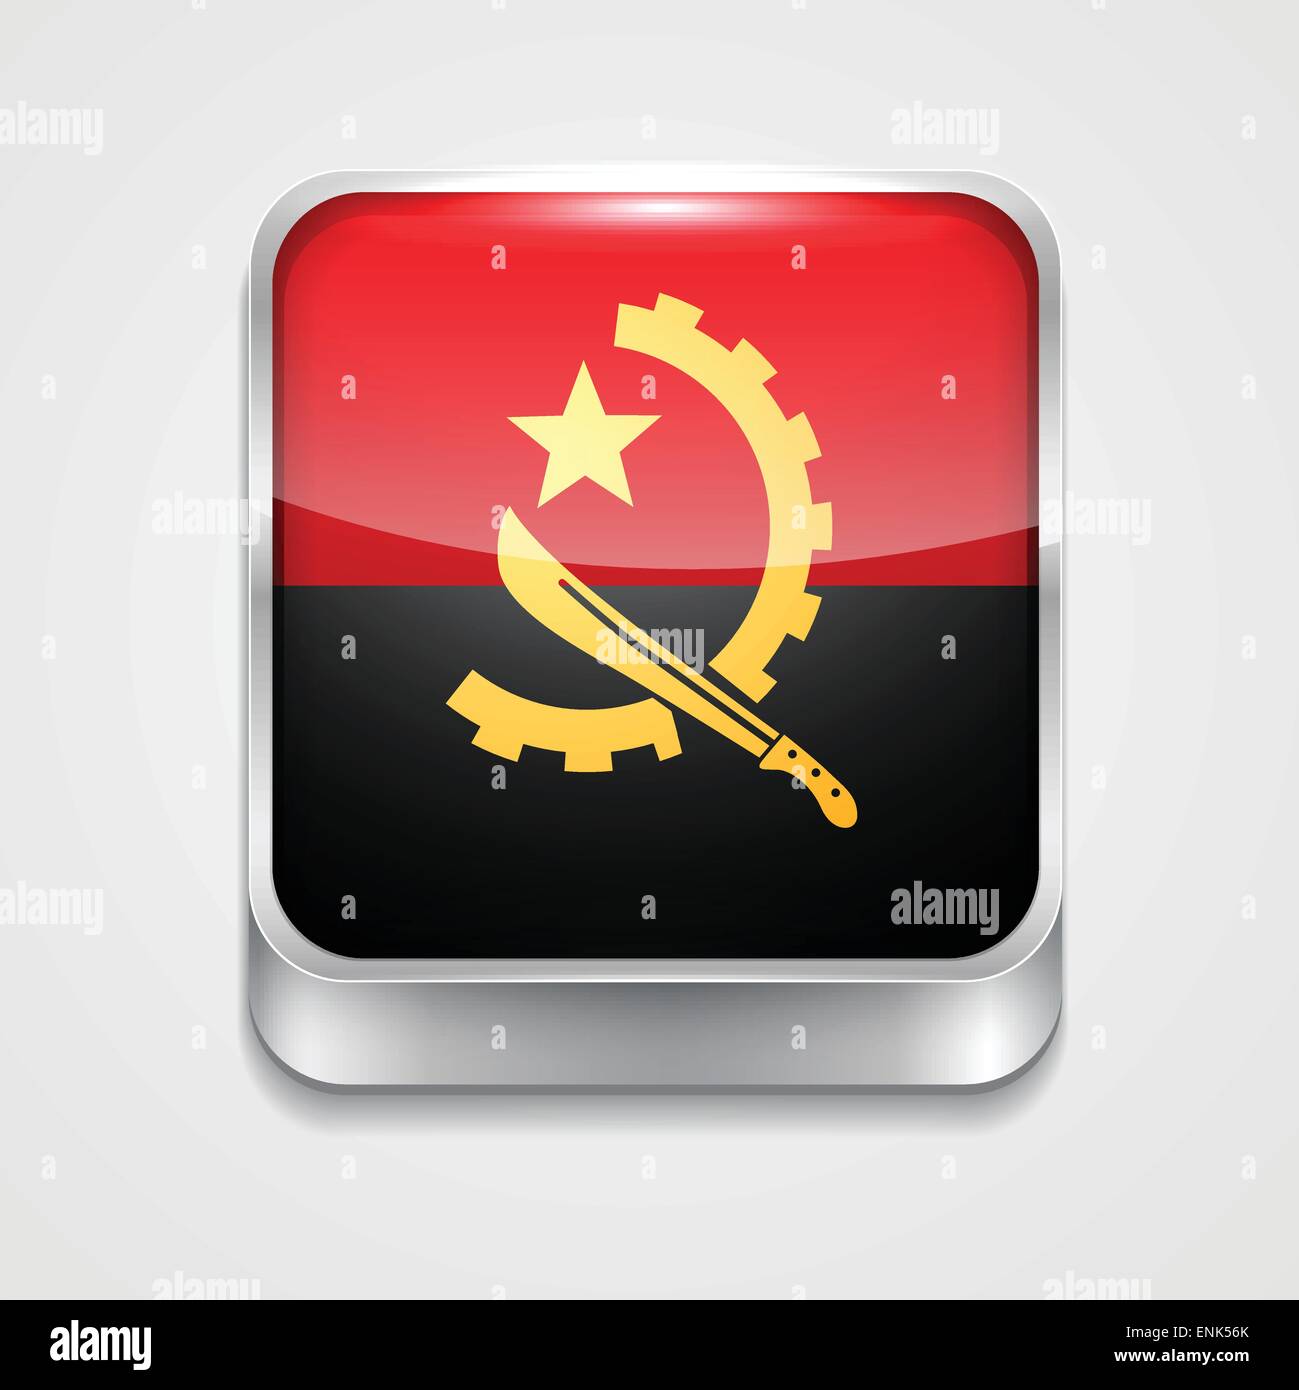 vector 3d style flag icon of angola Stock Vector